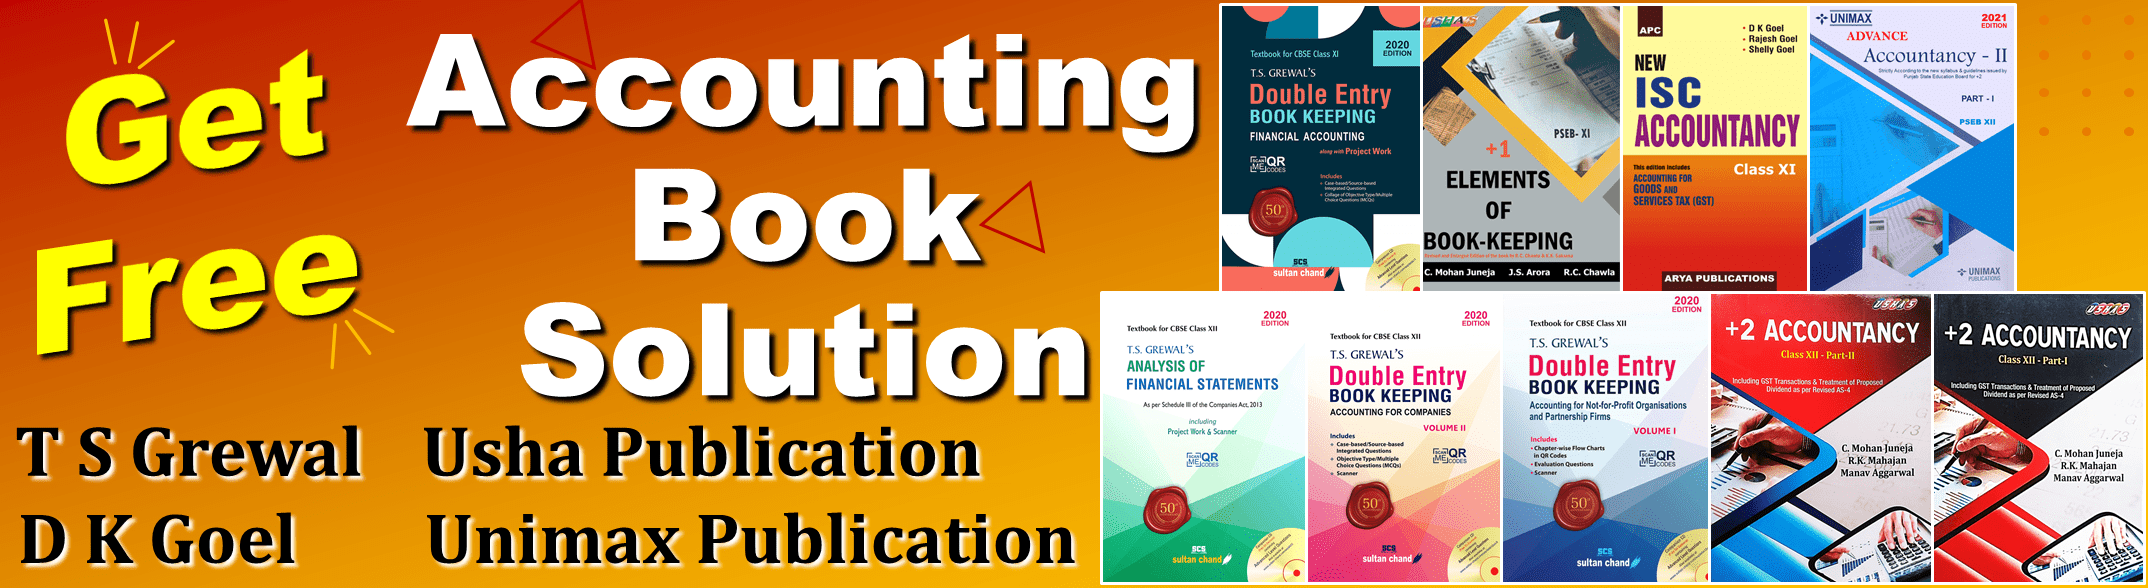 Free Accounting book Solution - Class 11 and Class 12